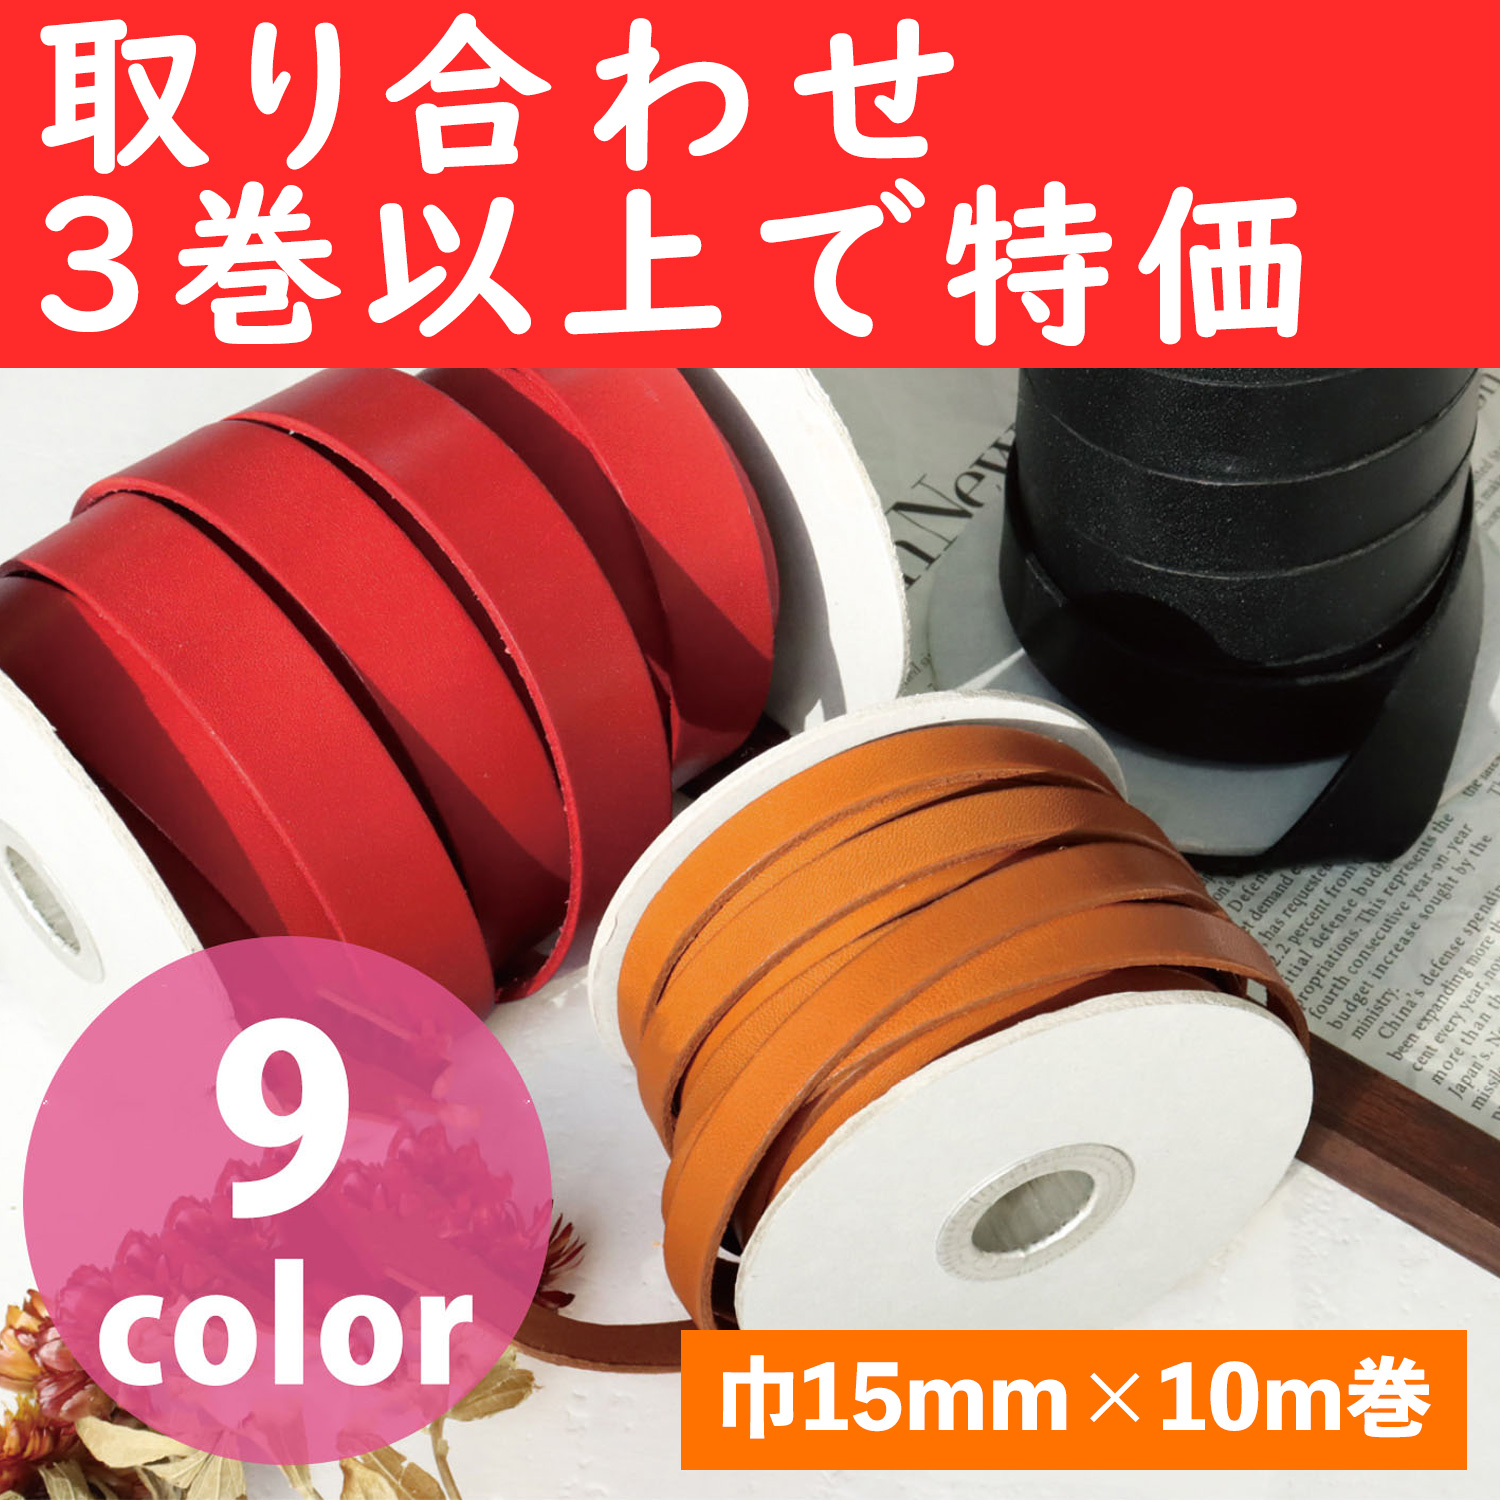 MTLS1015-OVER3 Special) Leather Tape, orders with 3rolls or more (roll)